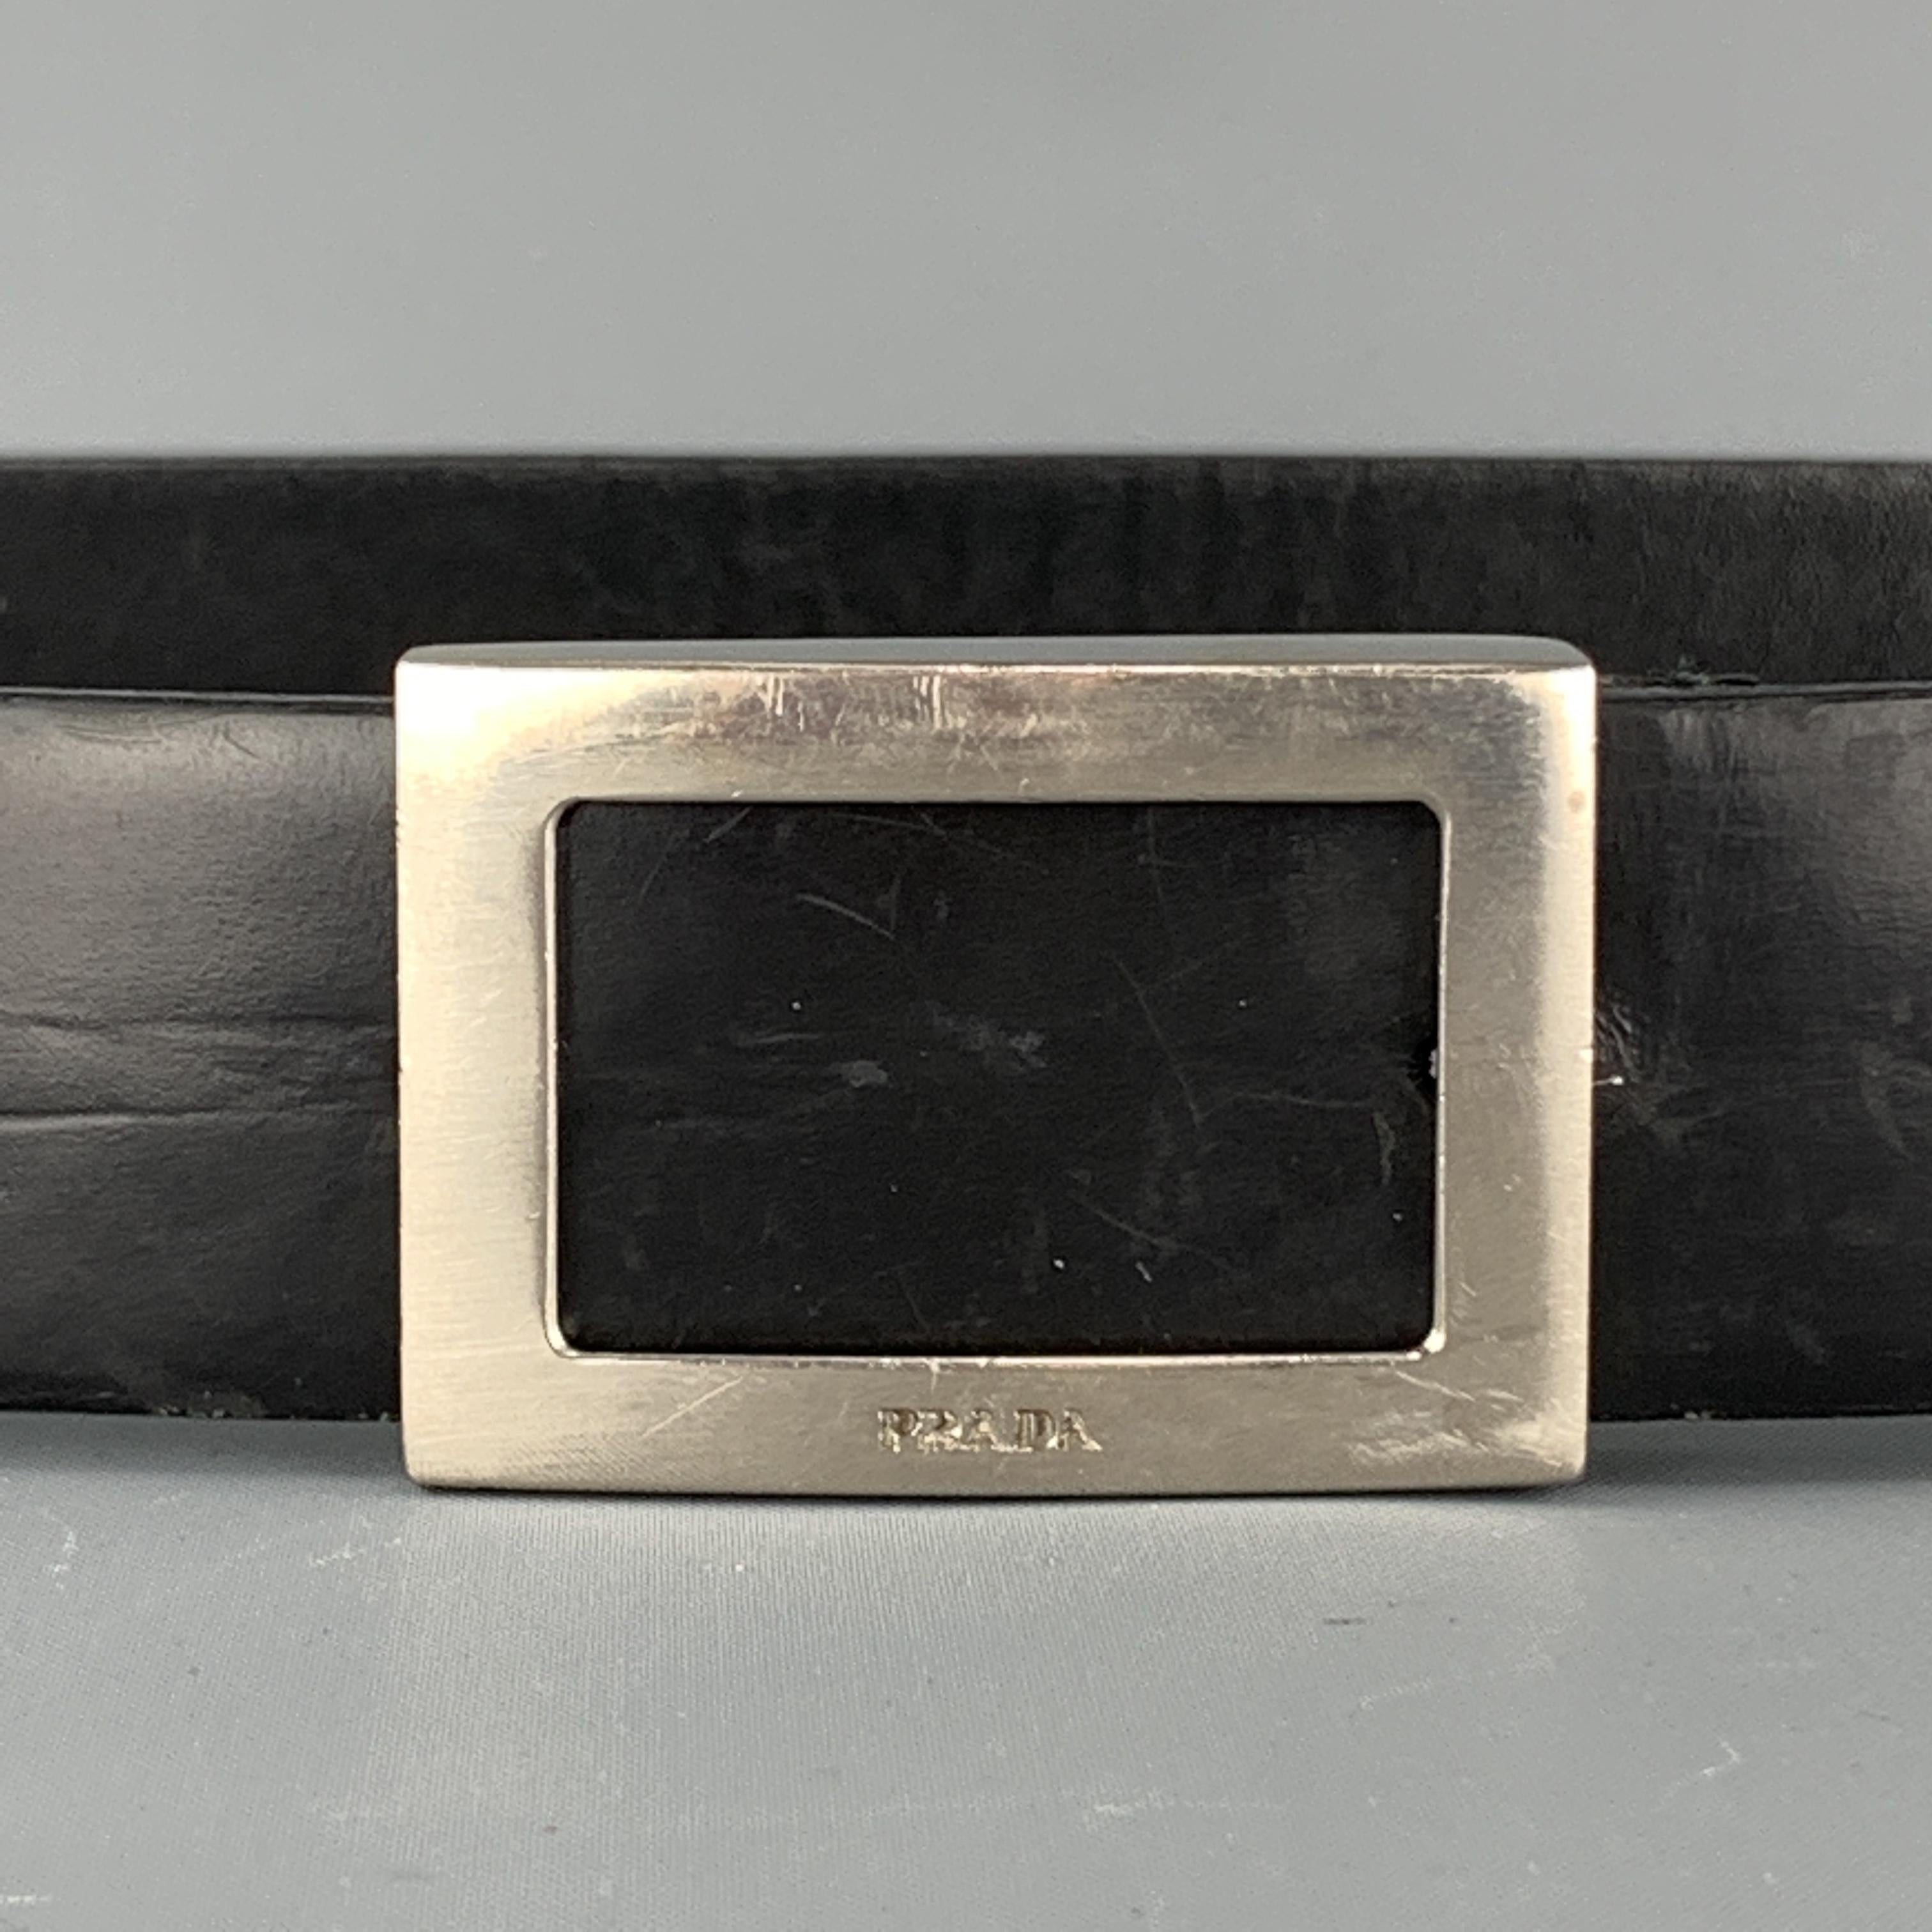 Vintage Prada belt features a black smooth leather strap with a silver tone rectangular cutout, logo engraved buckle. Wear throughout. As-is. Made in Italy.

Fair Pre-Owned Condition.
Marked: 32/80

Length: 38 in.
Width: 1.25 in.
Fits: 29.5 - 33.25